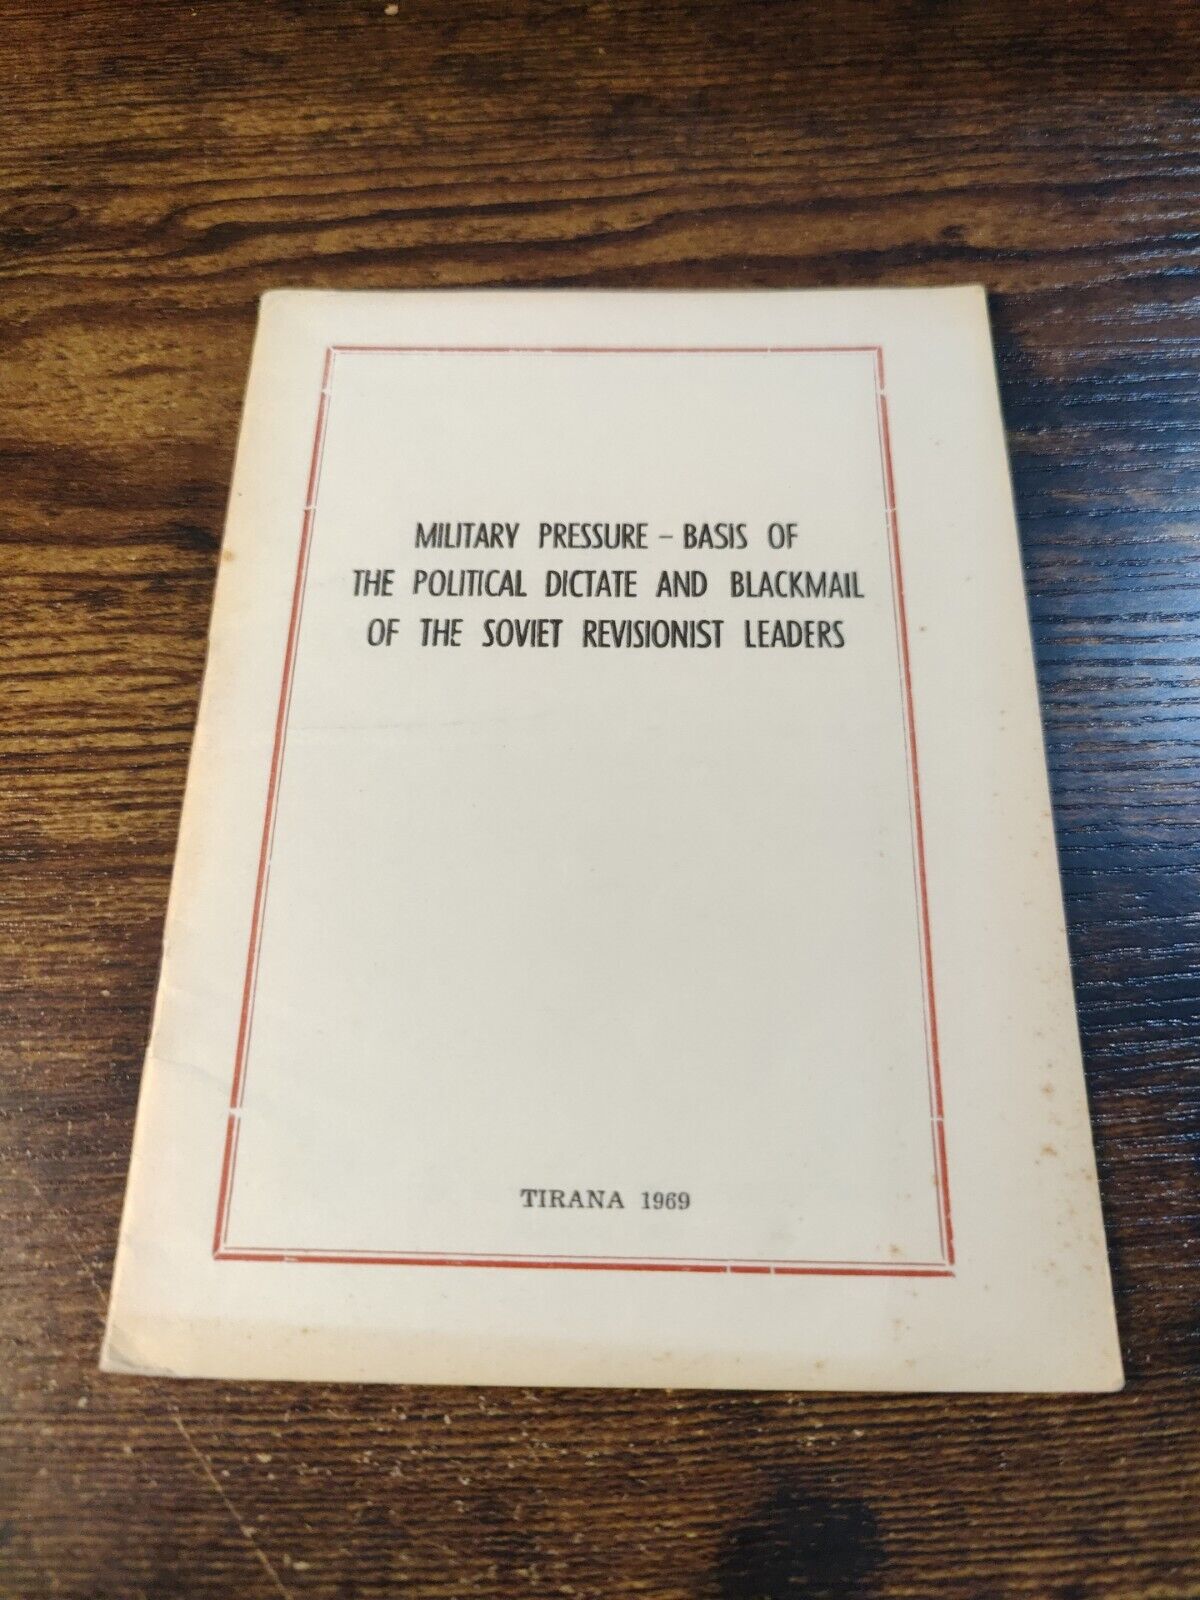 1969 Vintage Booklet: Military Pressure Basis Of Political Dictate & Blackmail